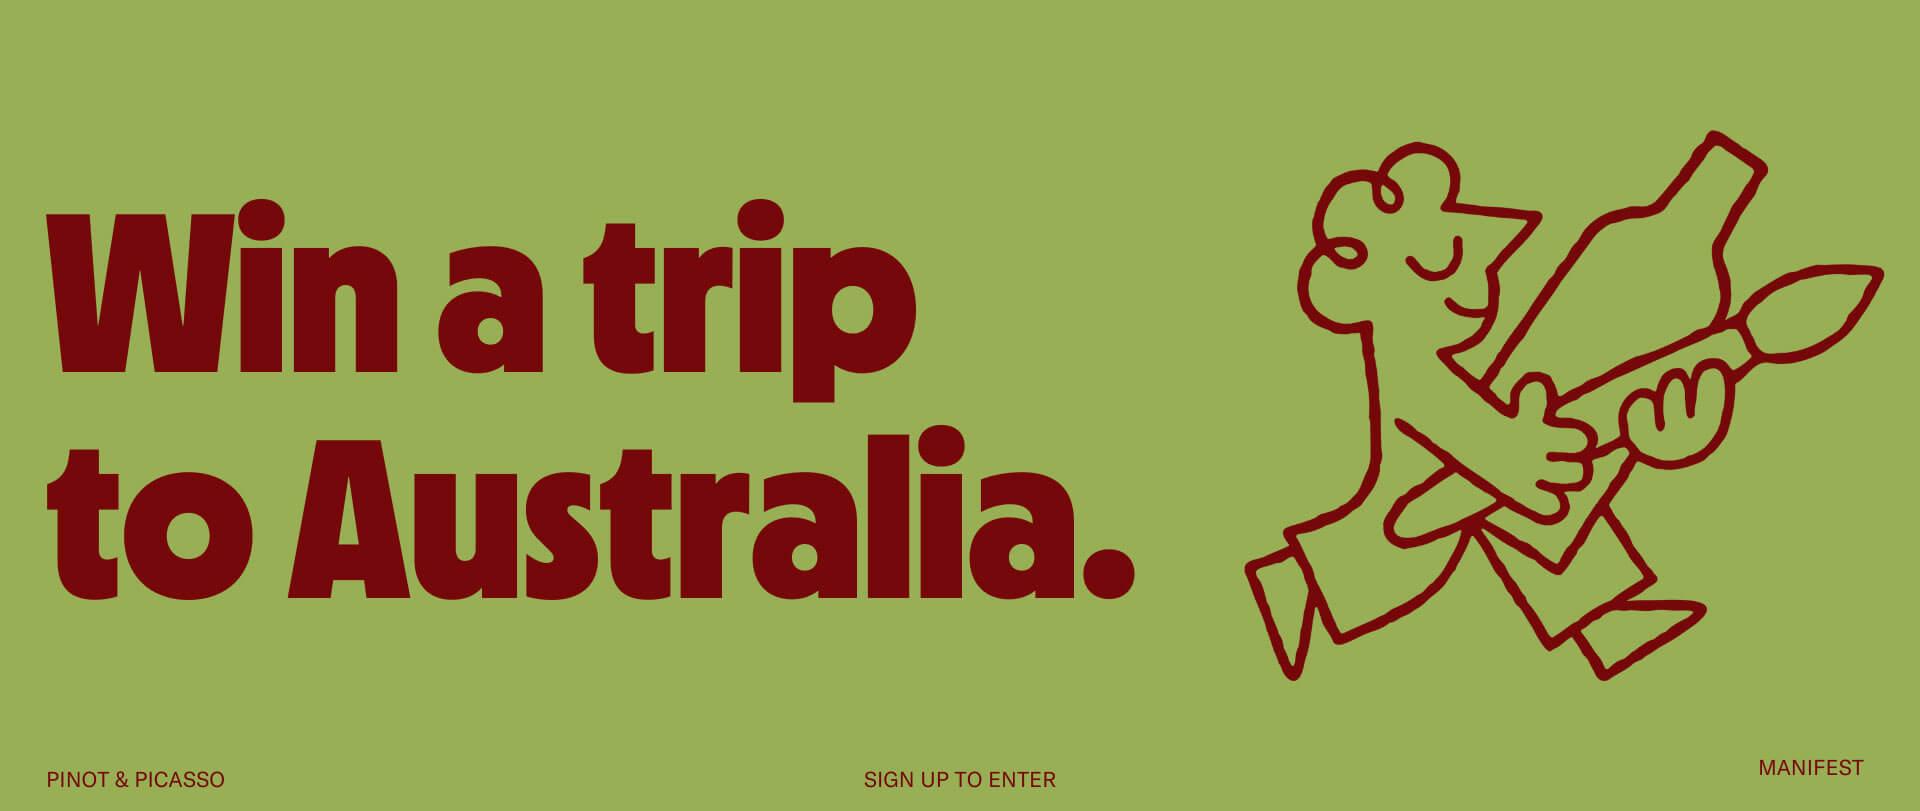 Win a trip to Australia with Pinot & Picasso